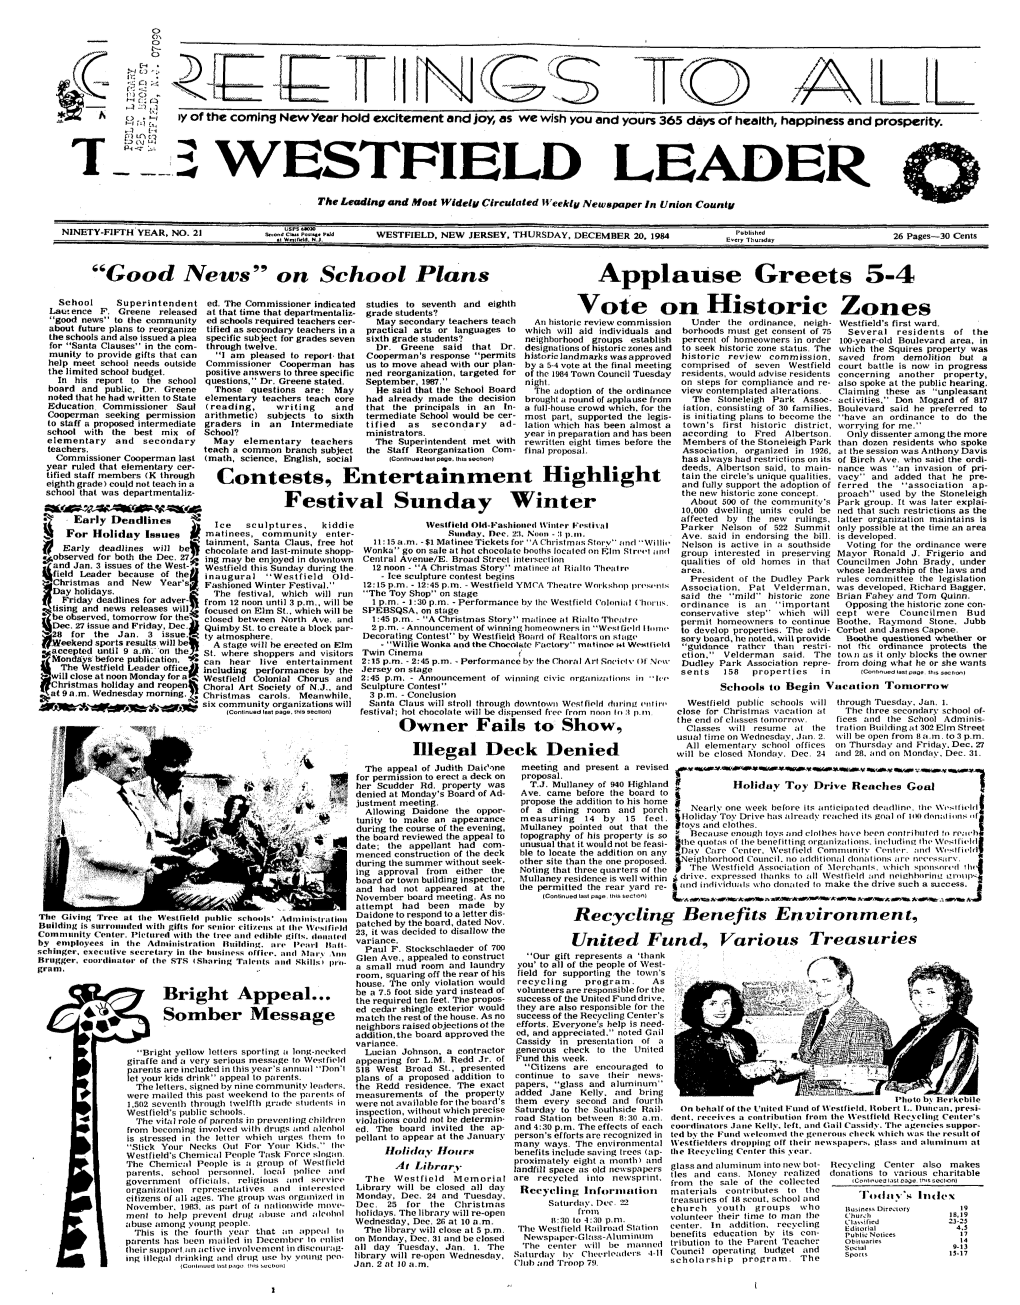 2 WESTFIELD LEADER the Leading and Most Widely Circulated Weekly Newspaper in Union County